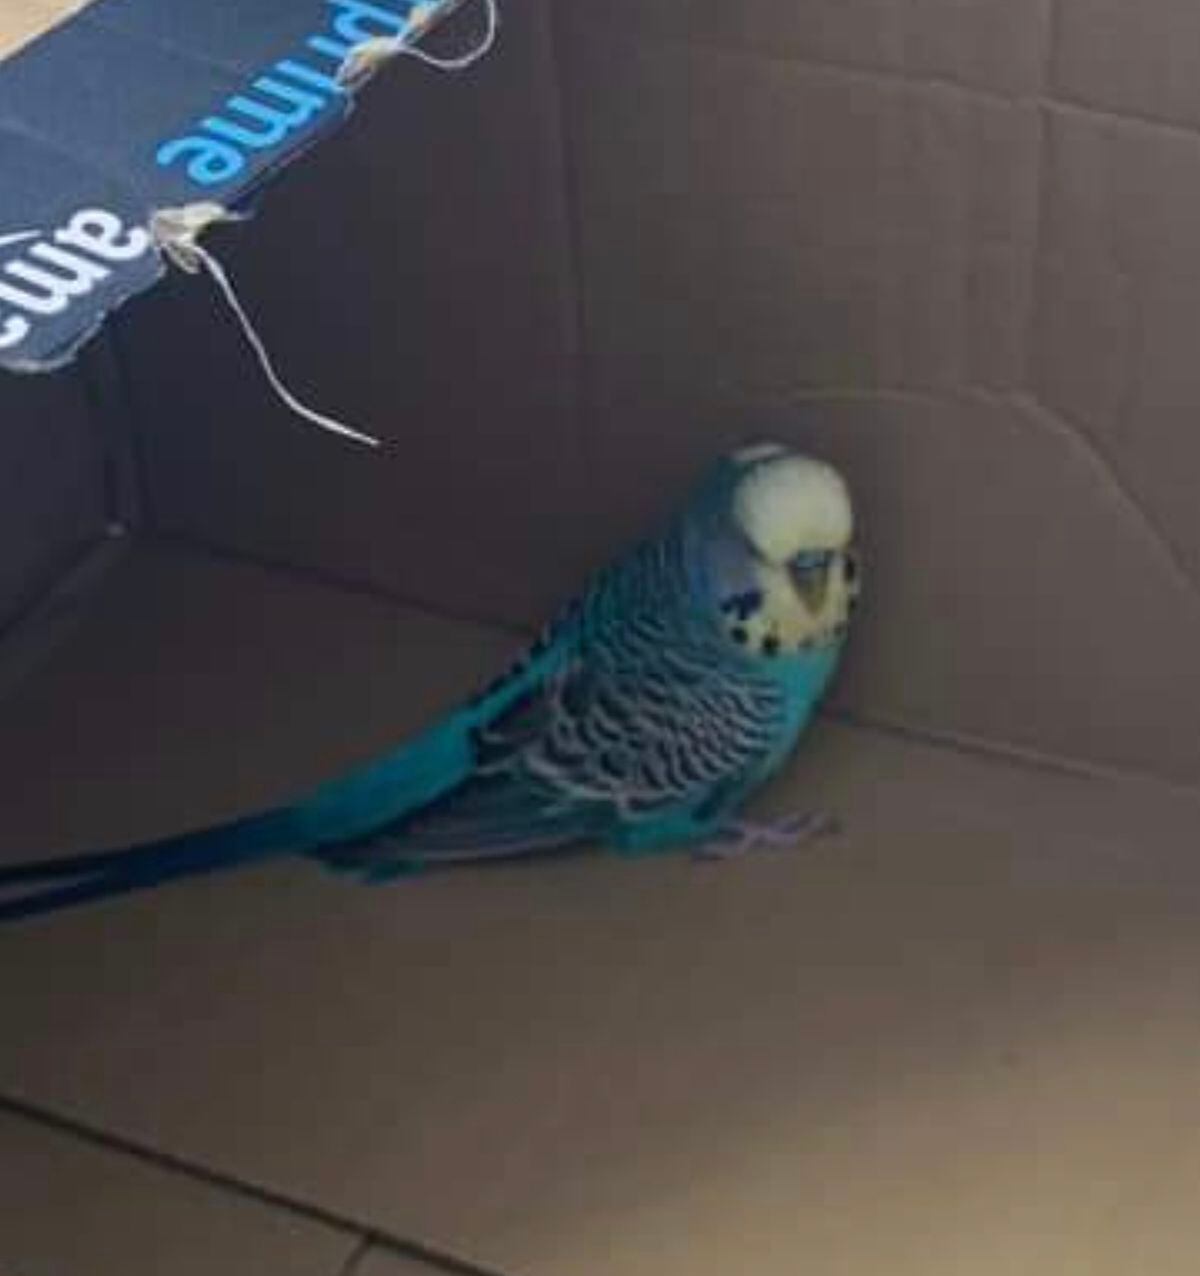 Pete made an Amazon deliver box his temporary home